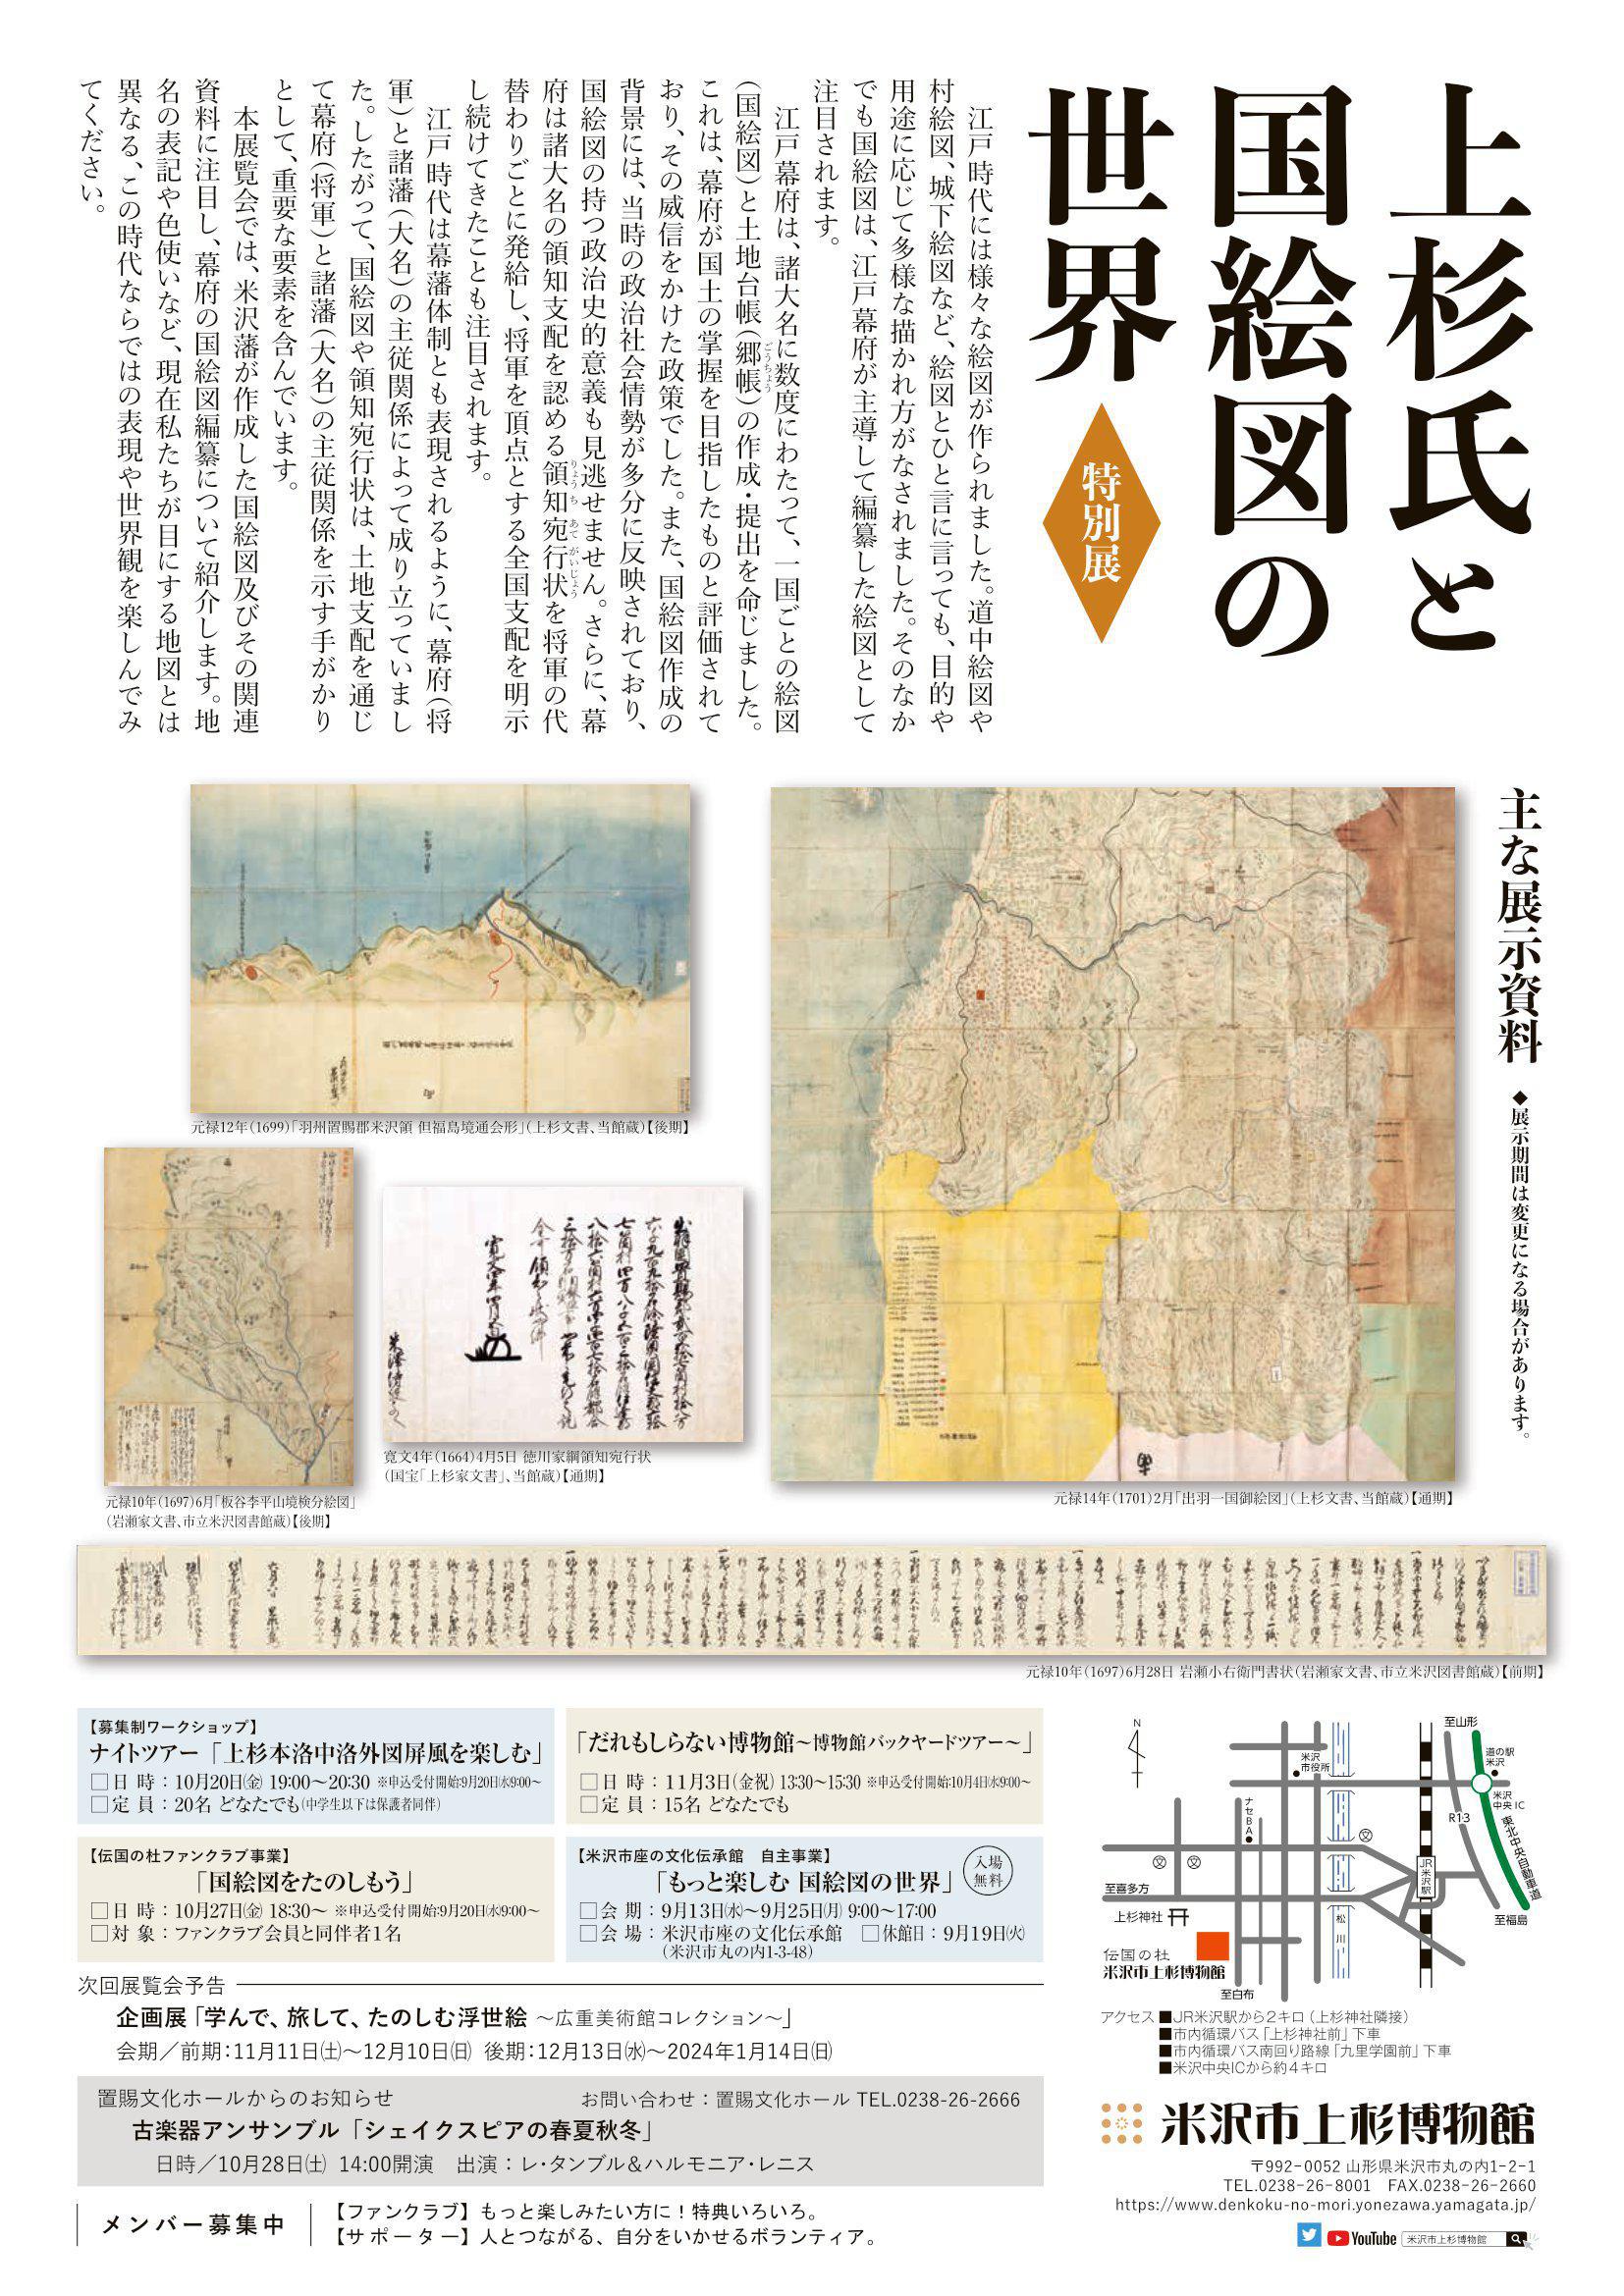 Uesugi Museum Upcoming Special Exhibit - The Uesugi Clan and the World of Kuniezu Provincial Maps